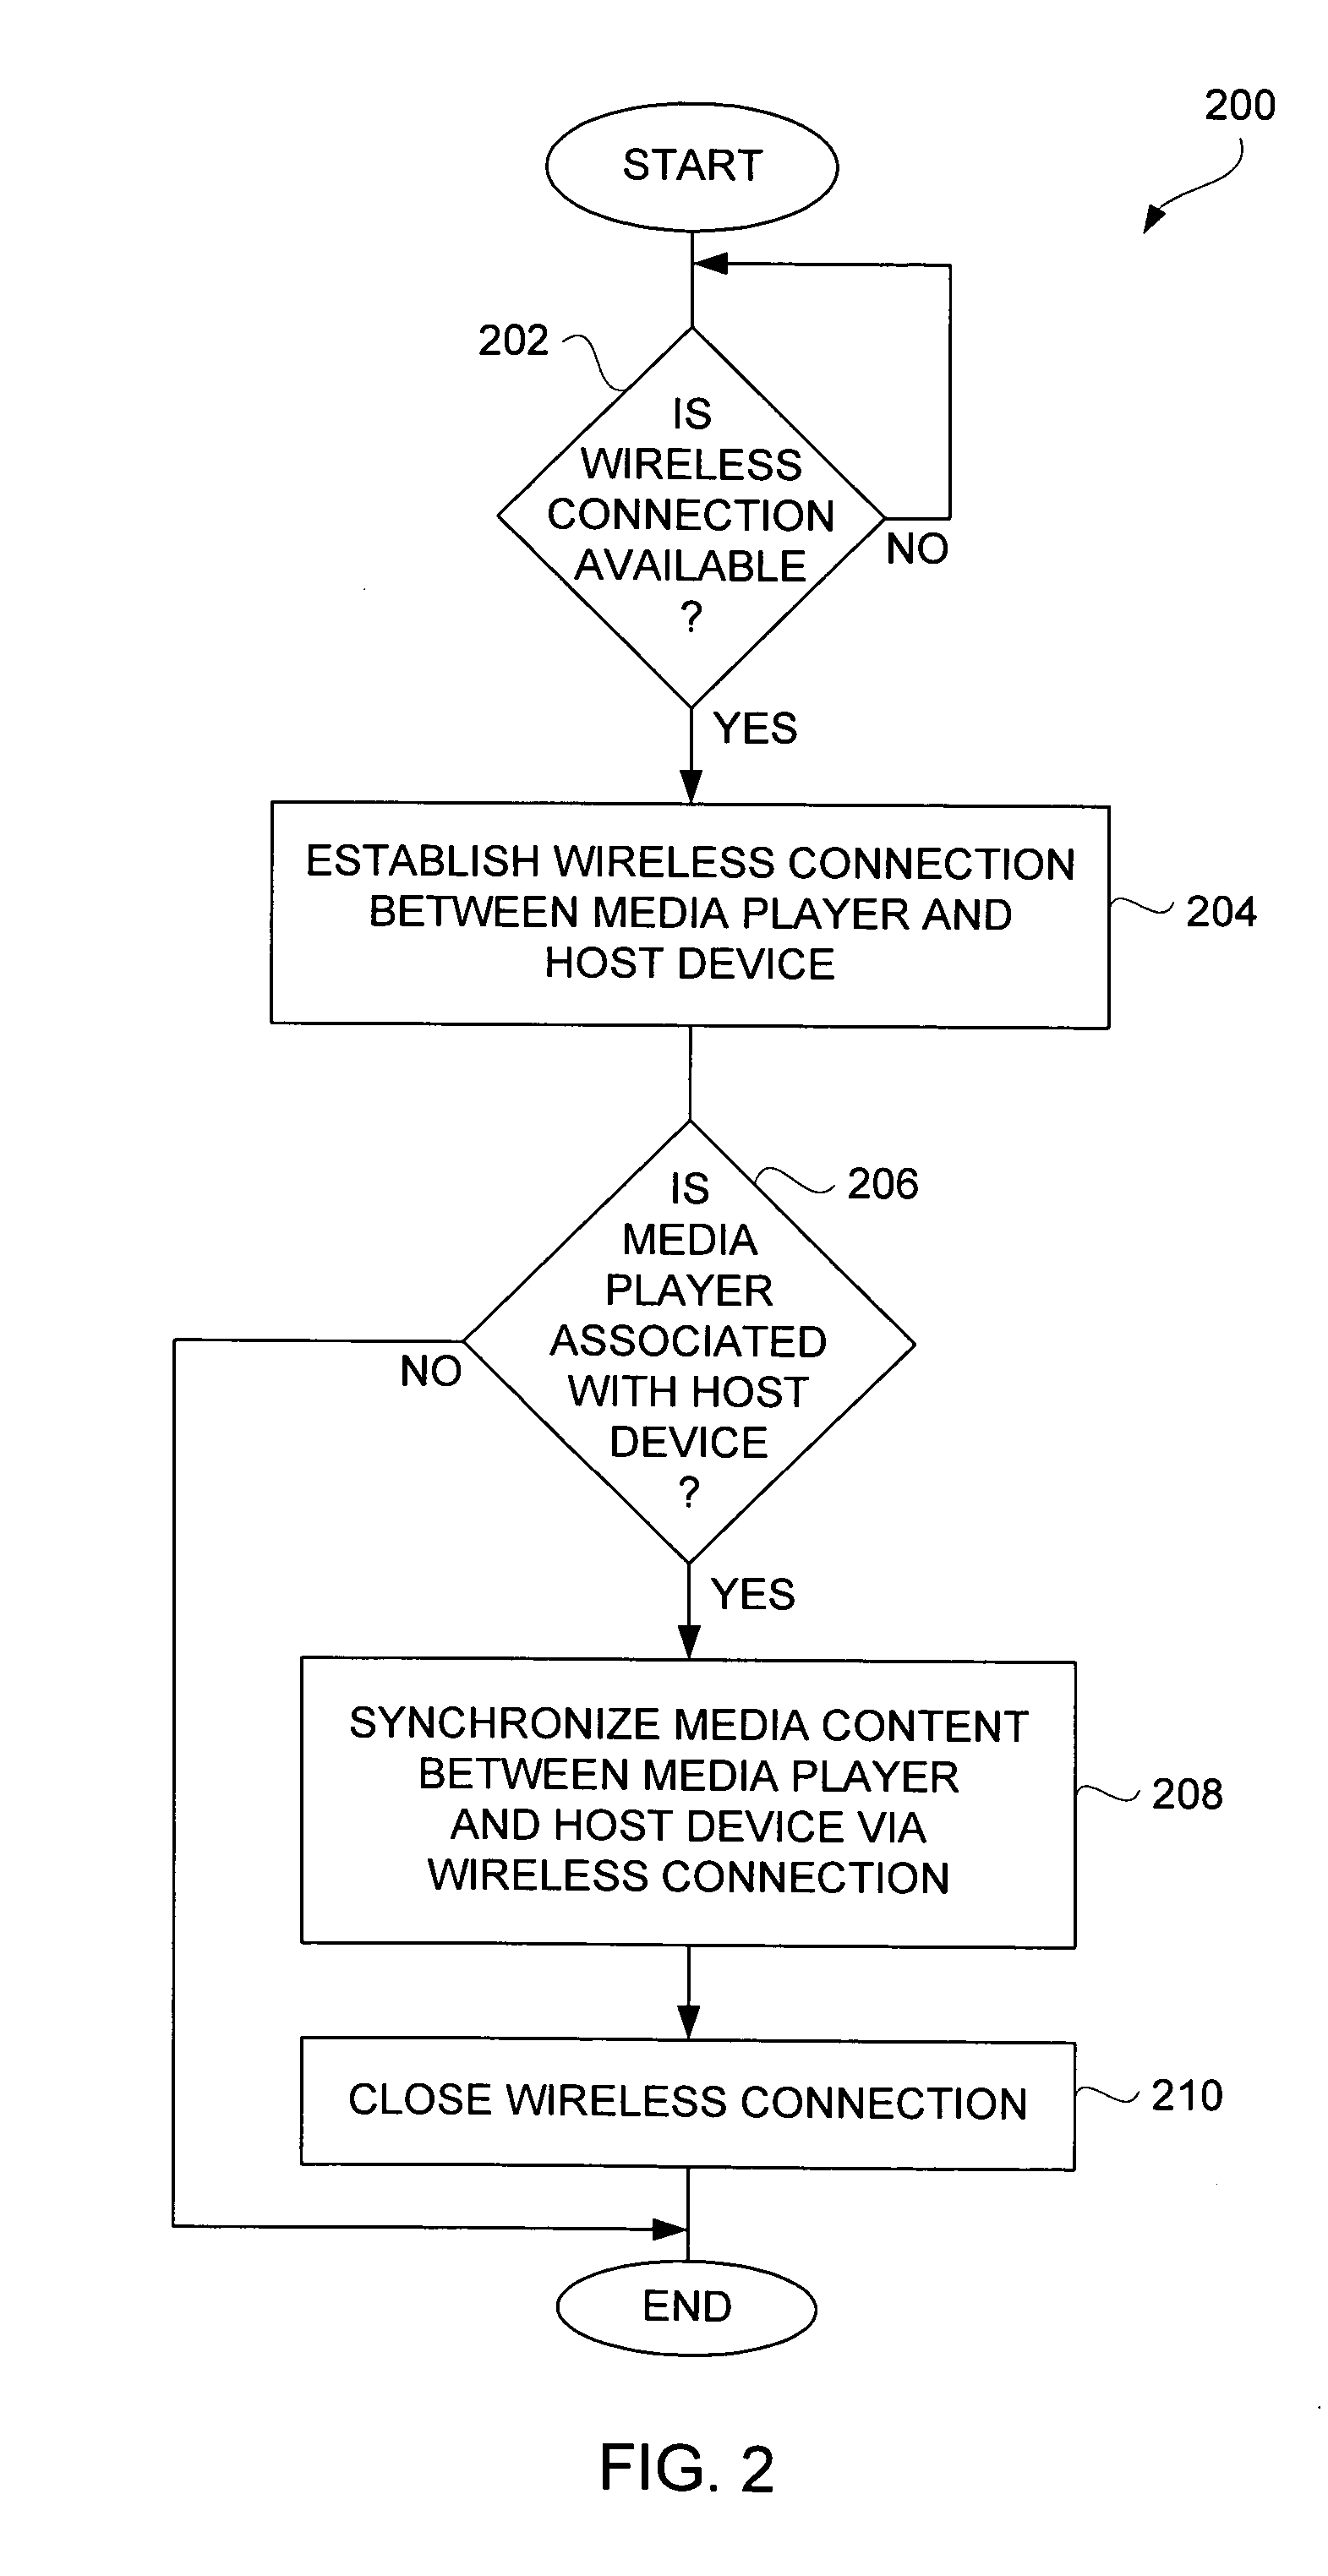 Wireless synchronization between media player and host device